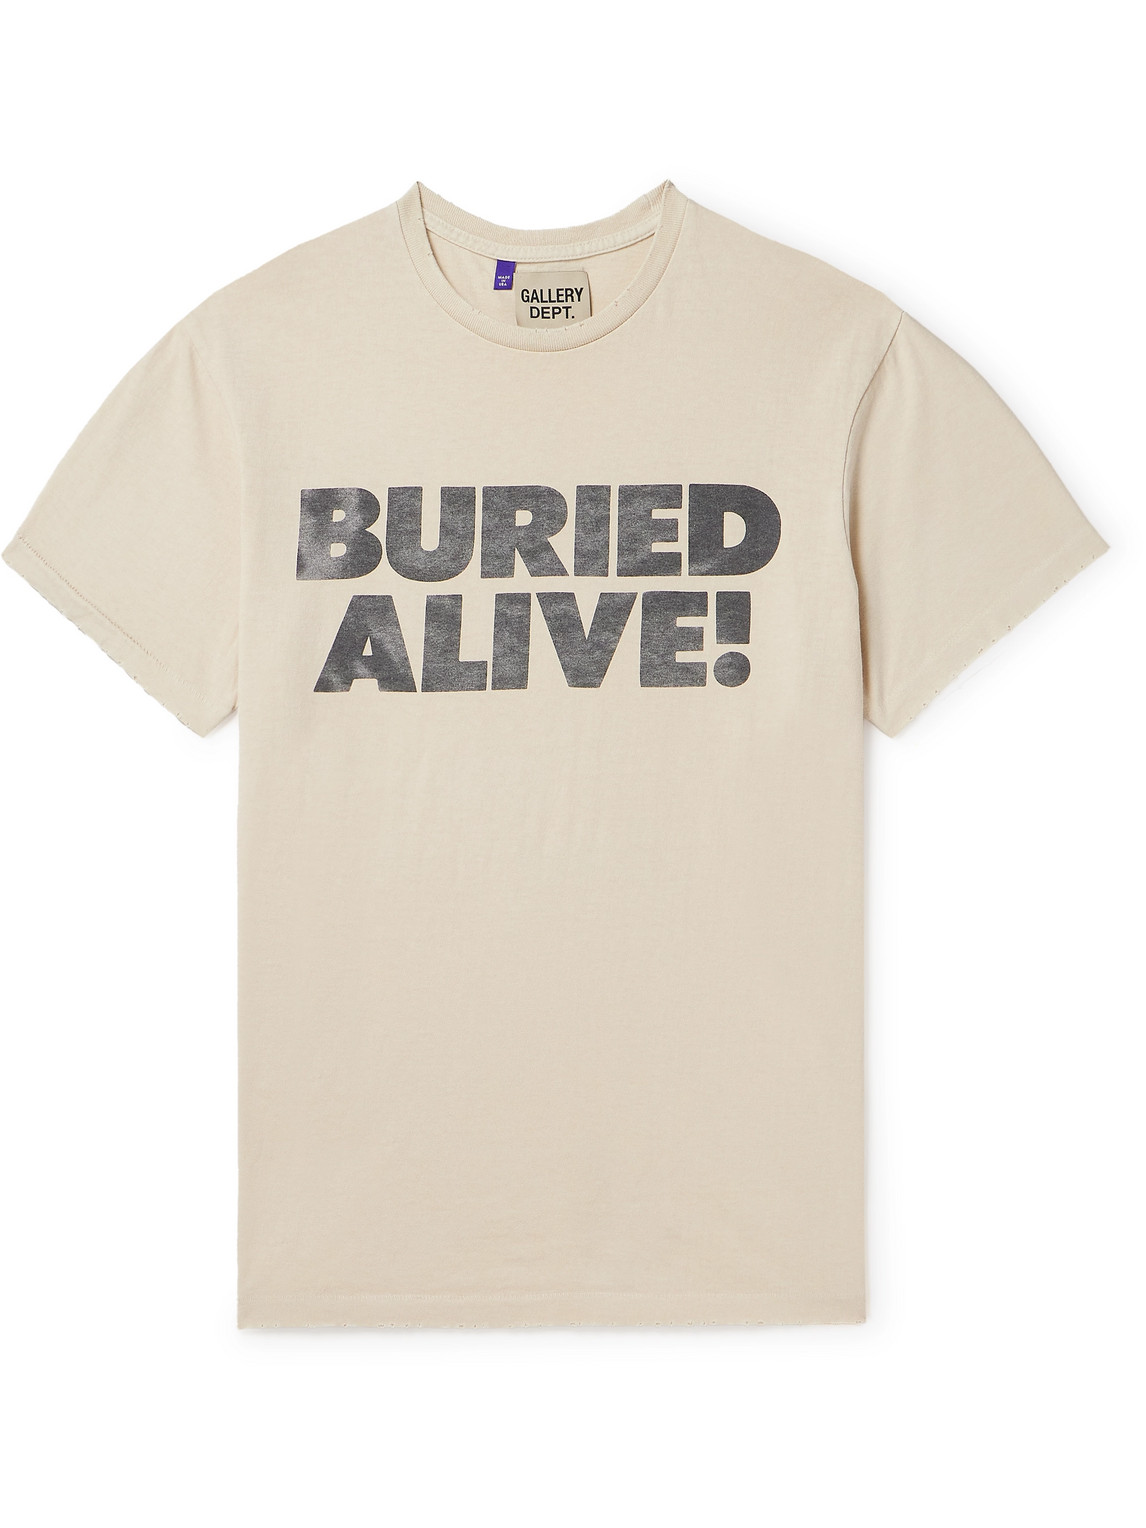 Gallery Dept. Buried Alive Distressed Printed Cotton-jersey T-shirt In Neutrals